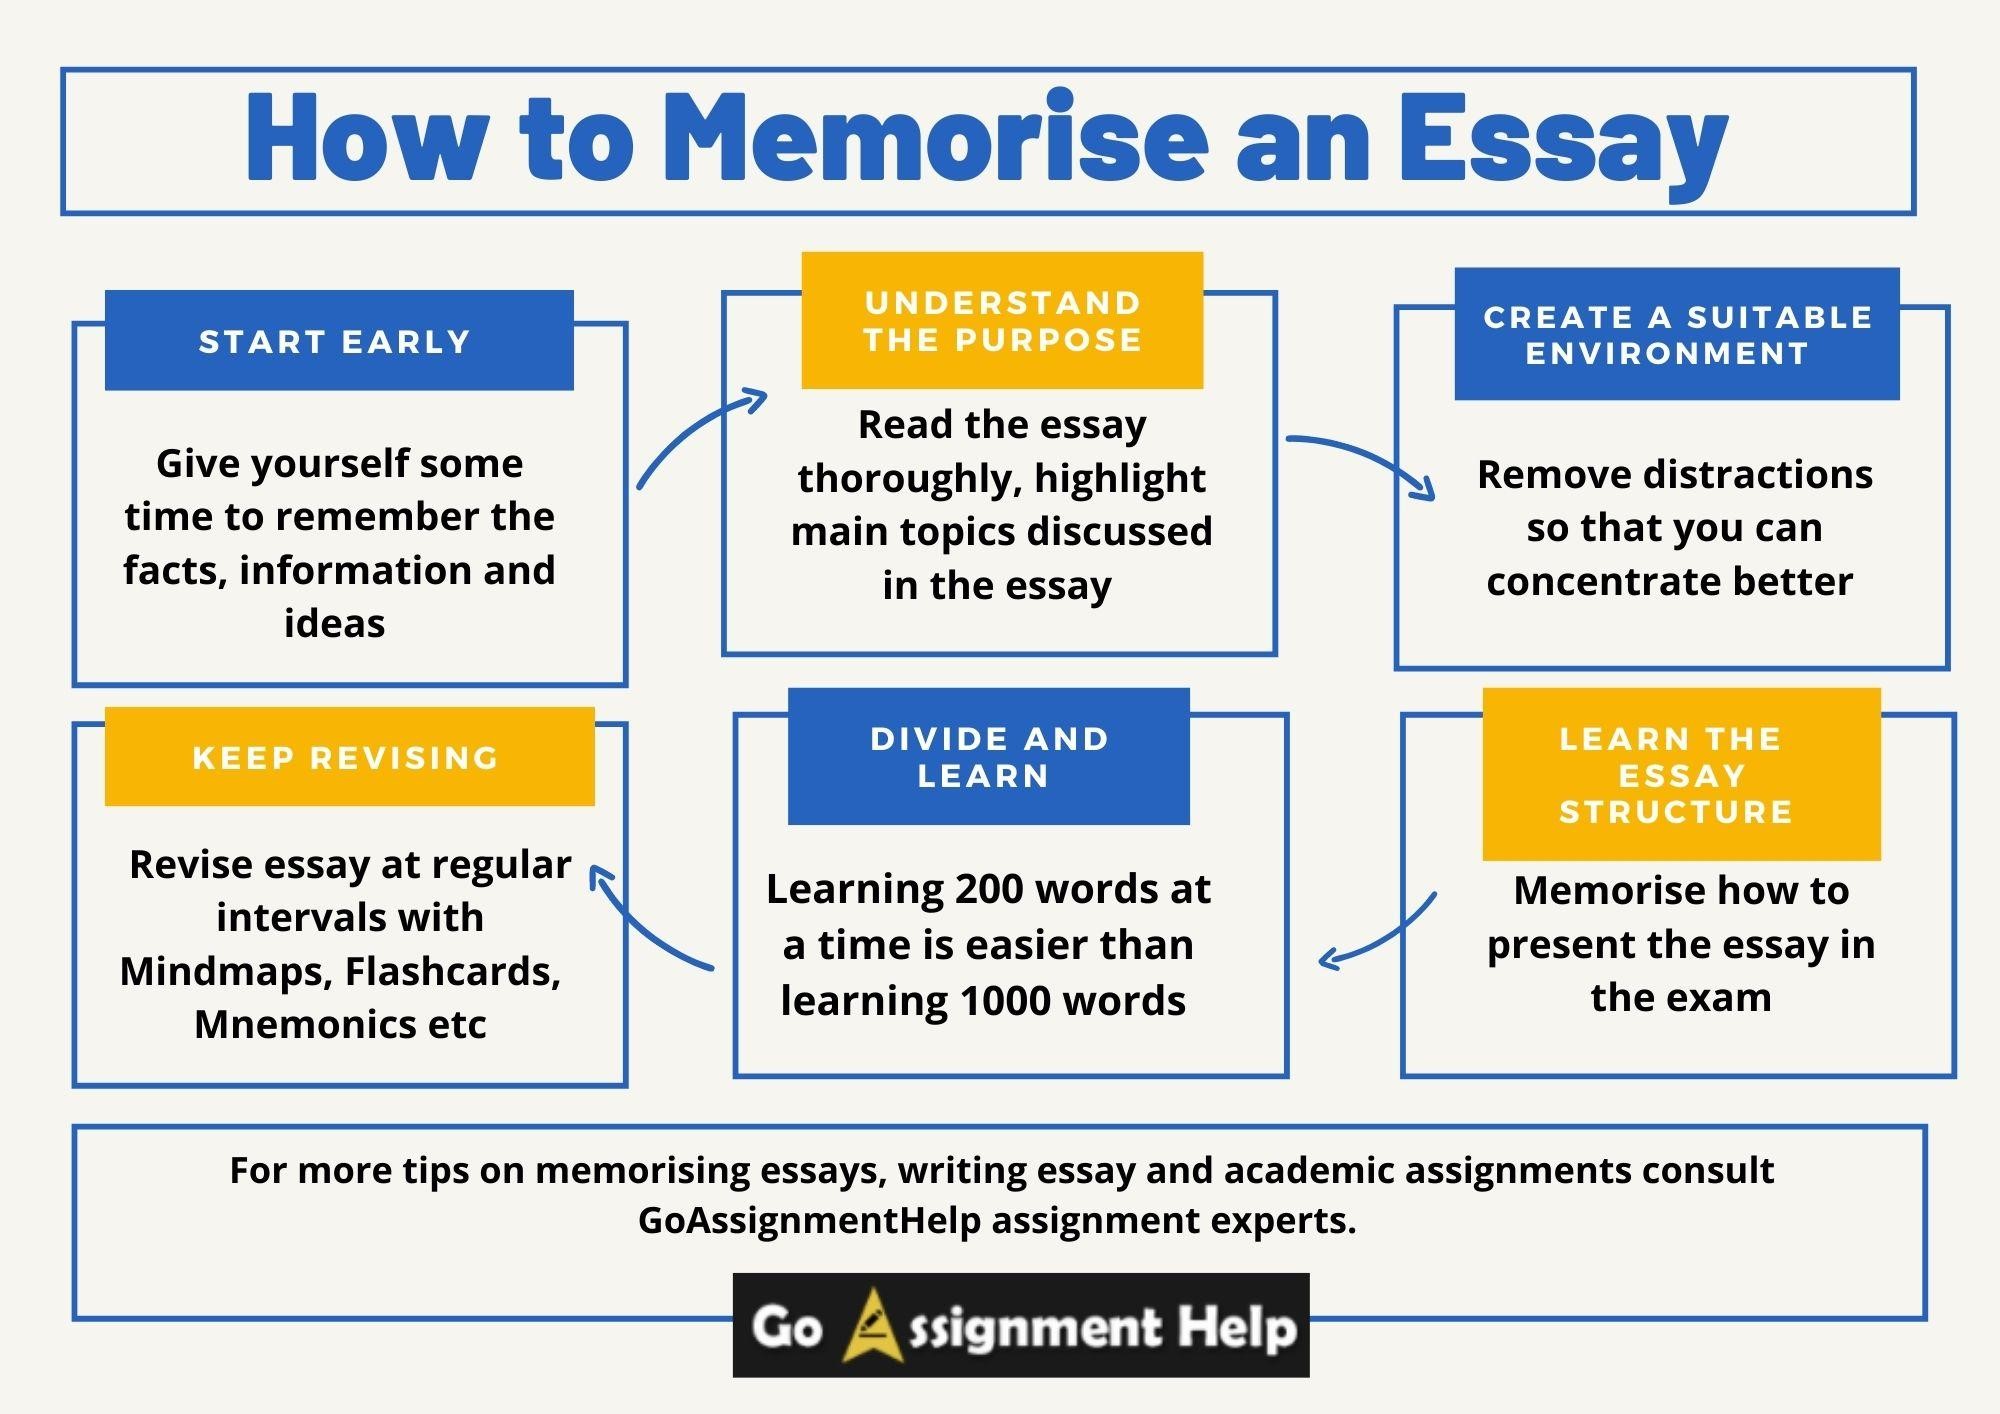 how to memorize essays fast